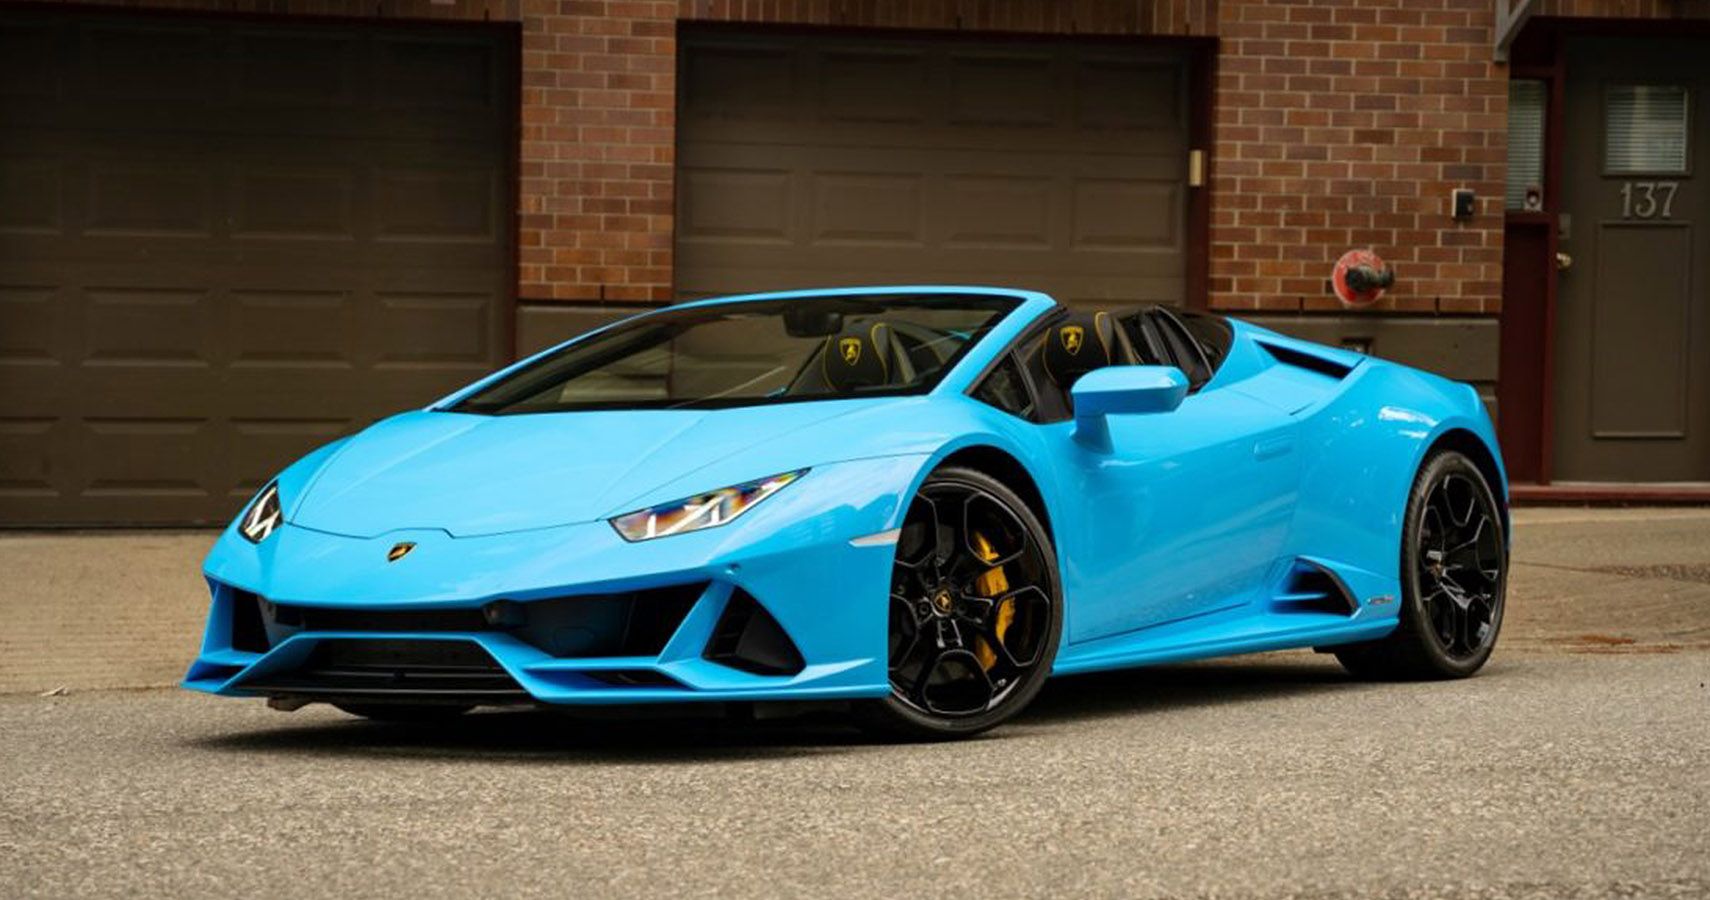 The Looks Are Amazing But Then Again, At $287,000, So Is The Price For The 2020 Lamborghini Huracán Evo Spyder